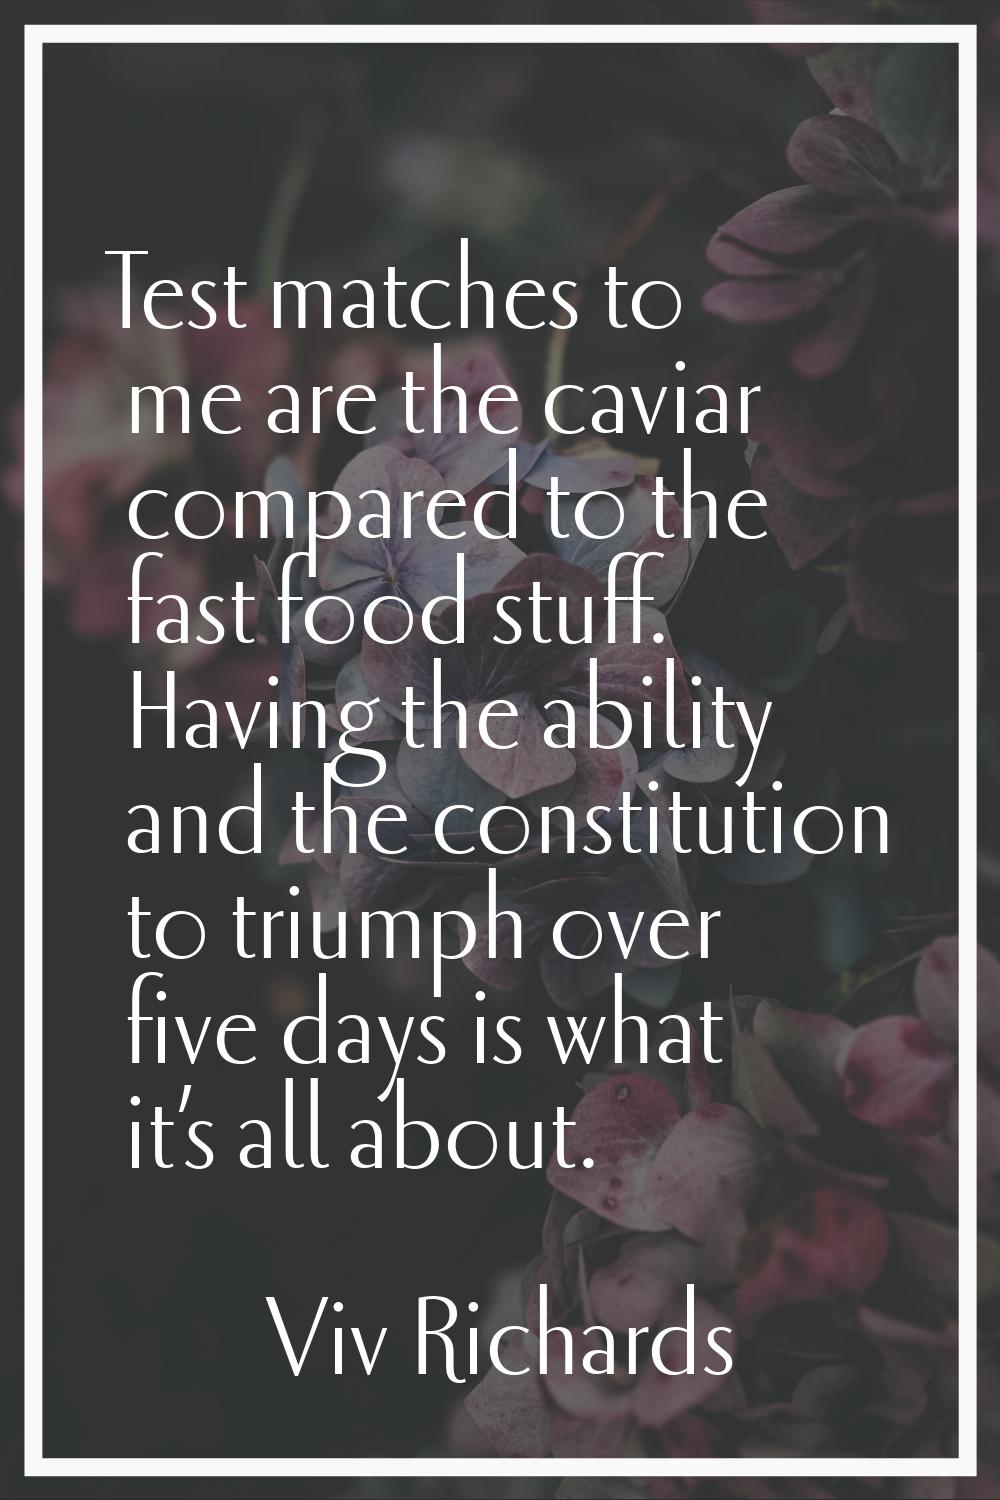 Test matches to me are the caviar compared to the fast food stuff. Having the ability and the const